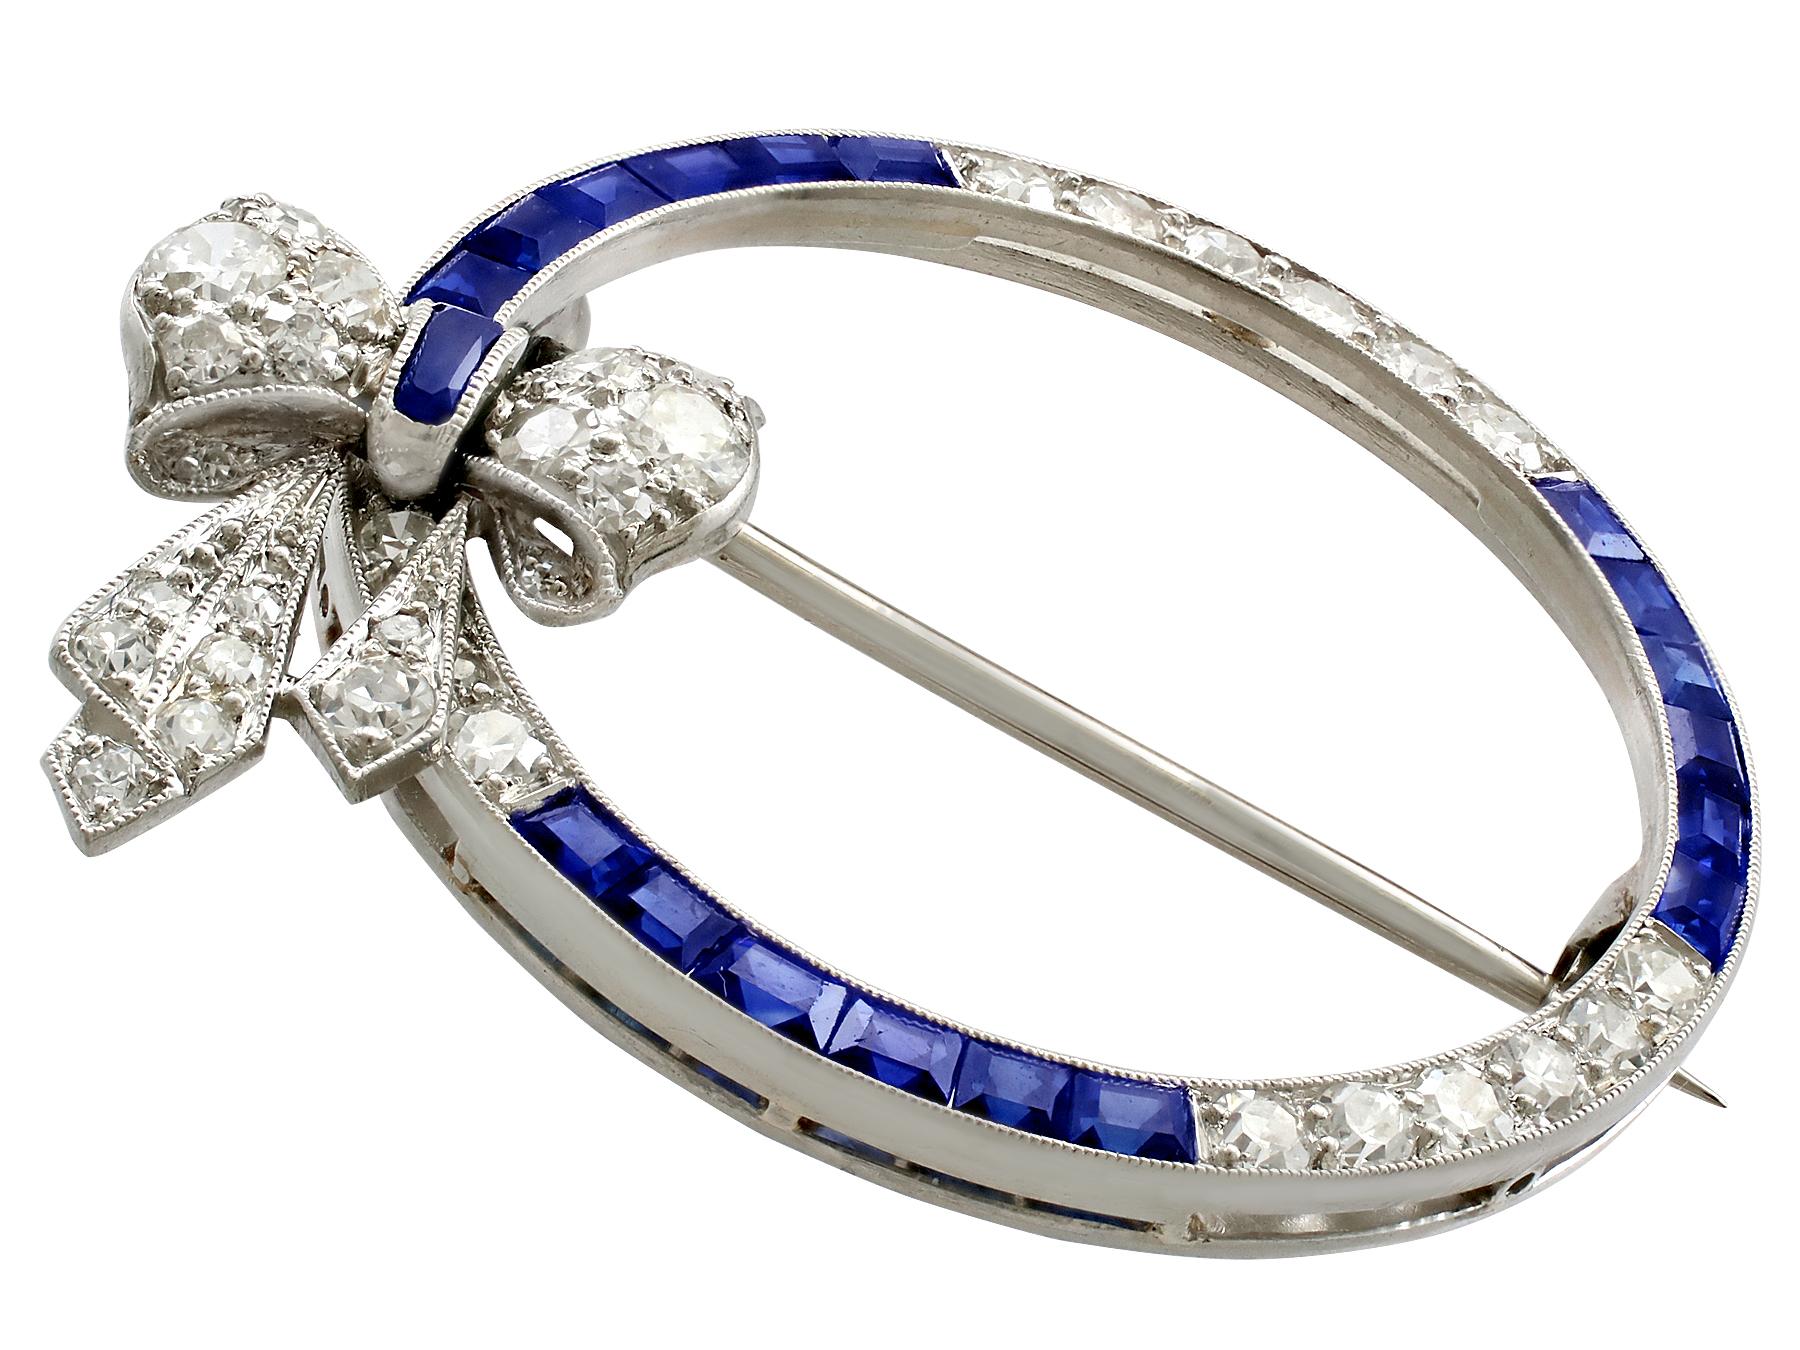 An impressive antique 0.60 carat sapphire and 1.27 carat diamond, platinum bow brooch with an 18 karat white gold pin; part of our diverse antique jewellery and estate jewelry collections.

This stunning, fine and impressive antique sapphire brooch